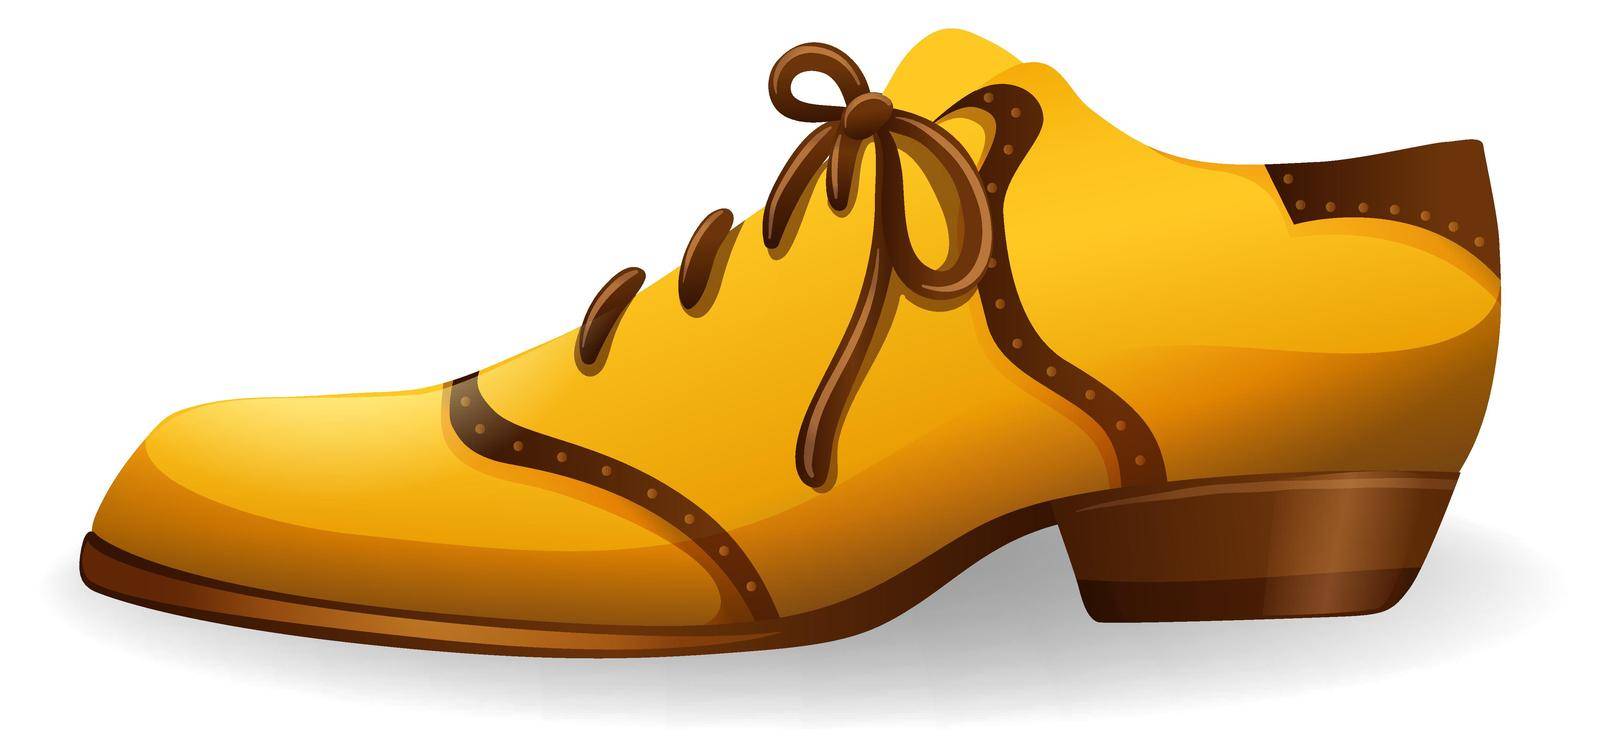 One side yellow-brown color shoe on a white background